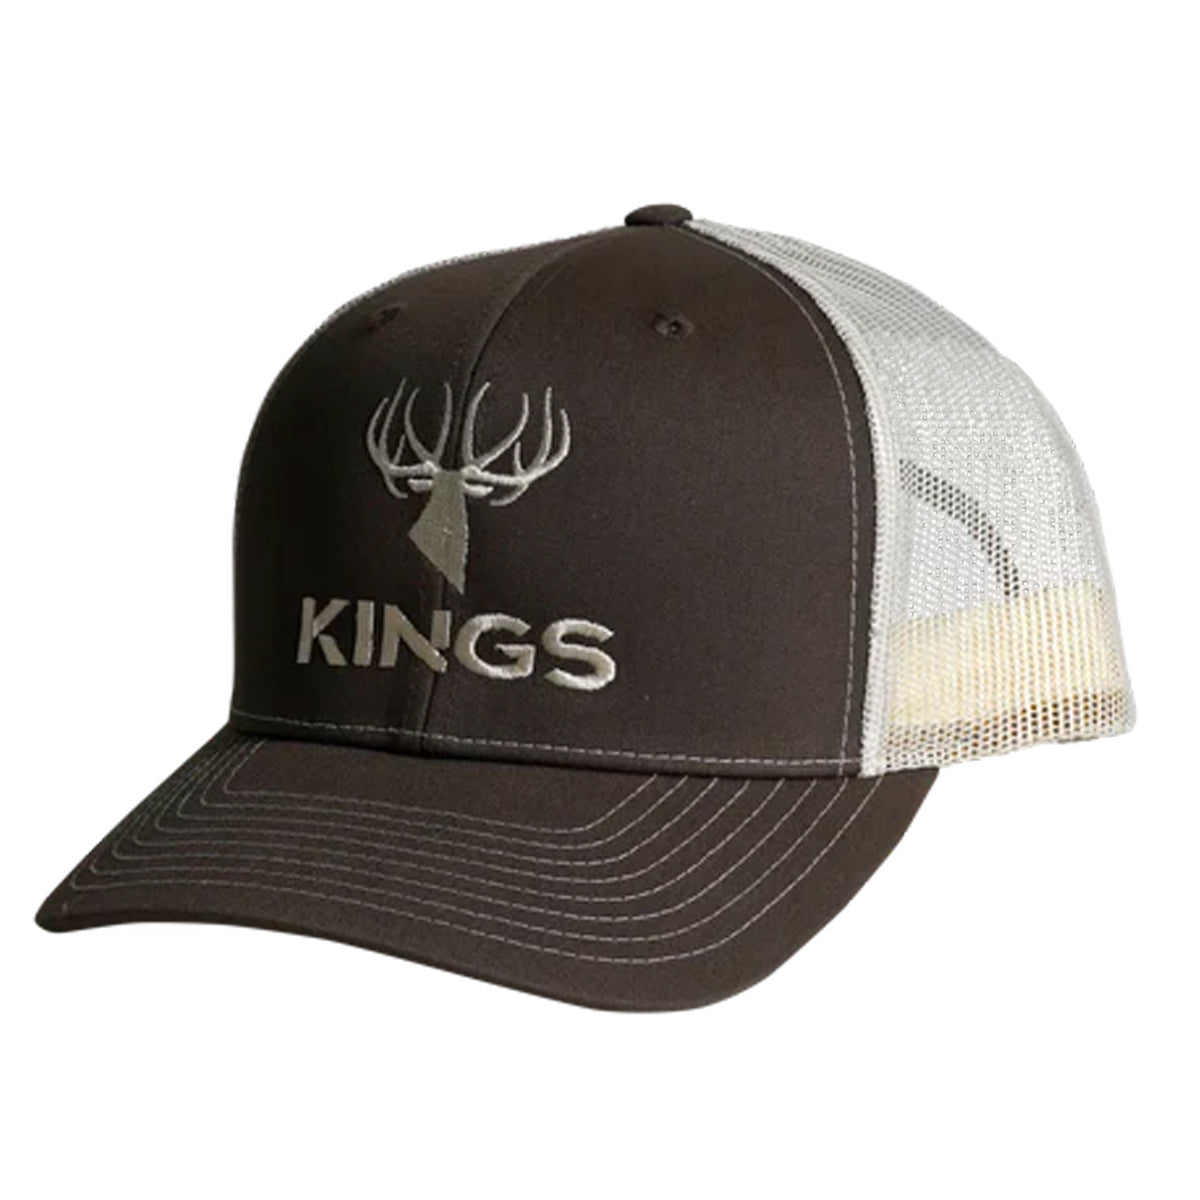 King's 112 Embroidered Logo Cap in  by GOHUNT | King's - GOHUNT Shop